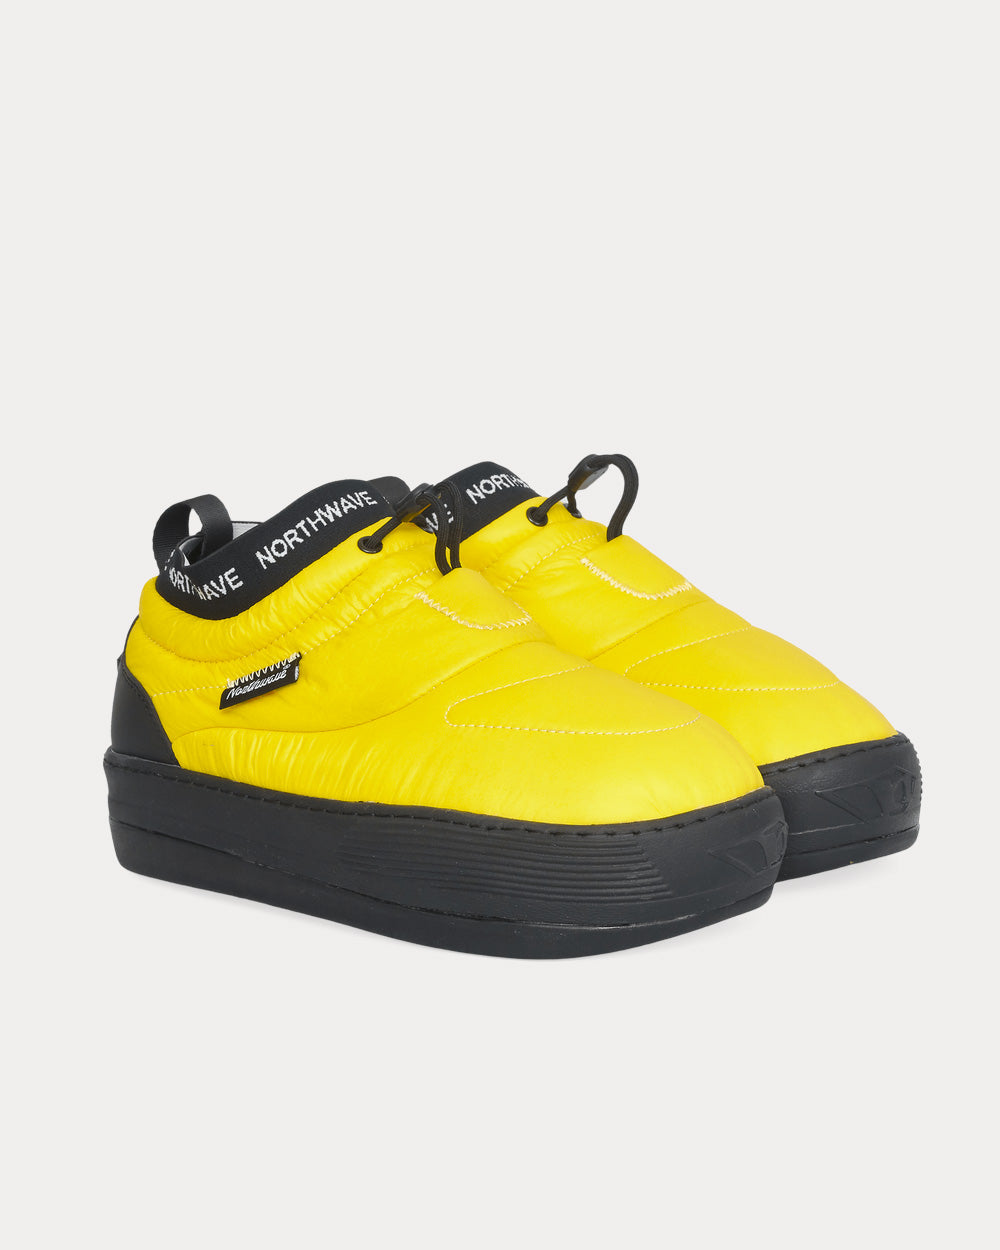 Northwave - Lock Lace Model Yellow High Top Sneakers